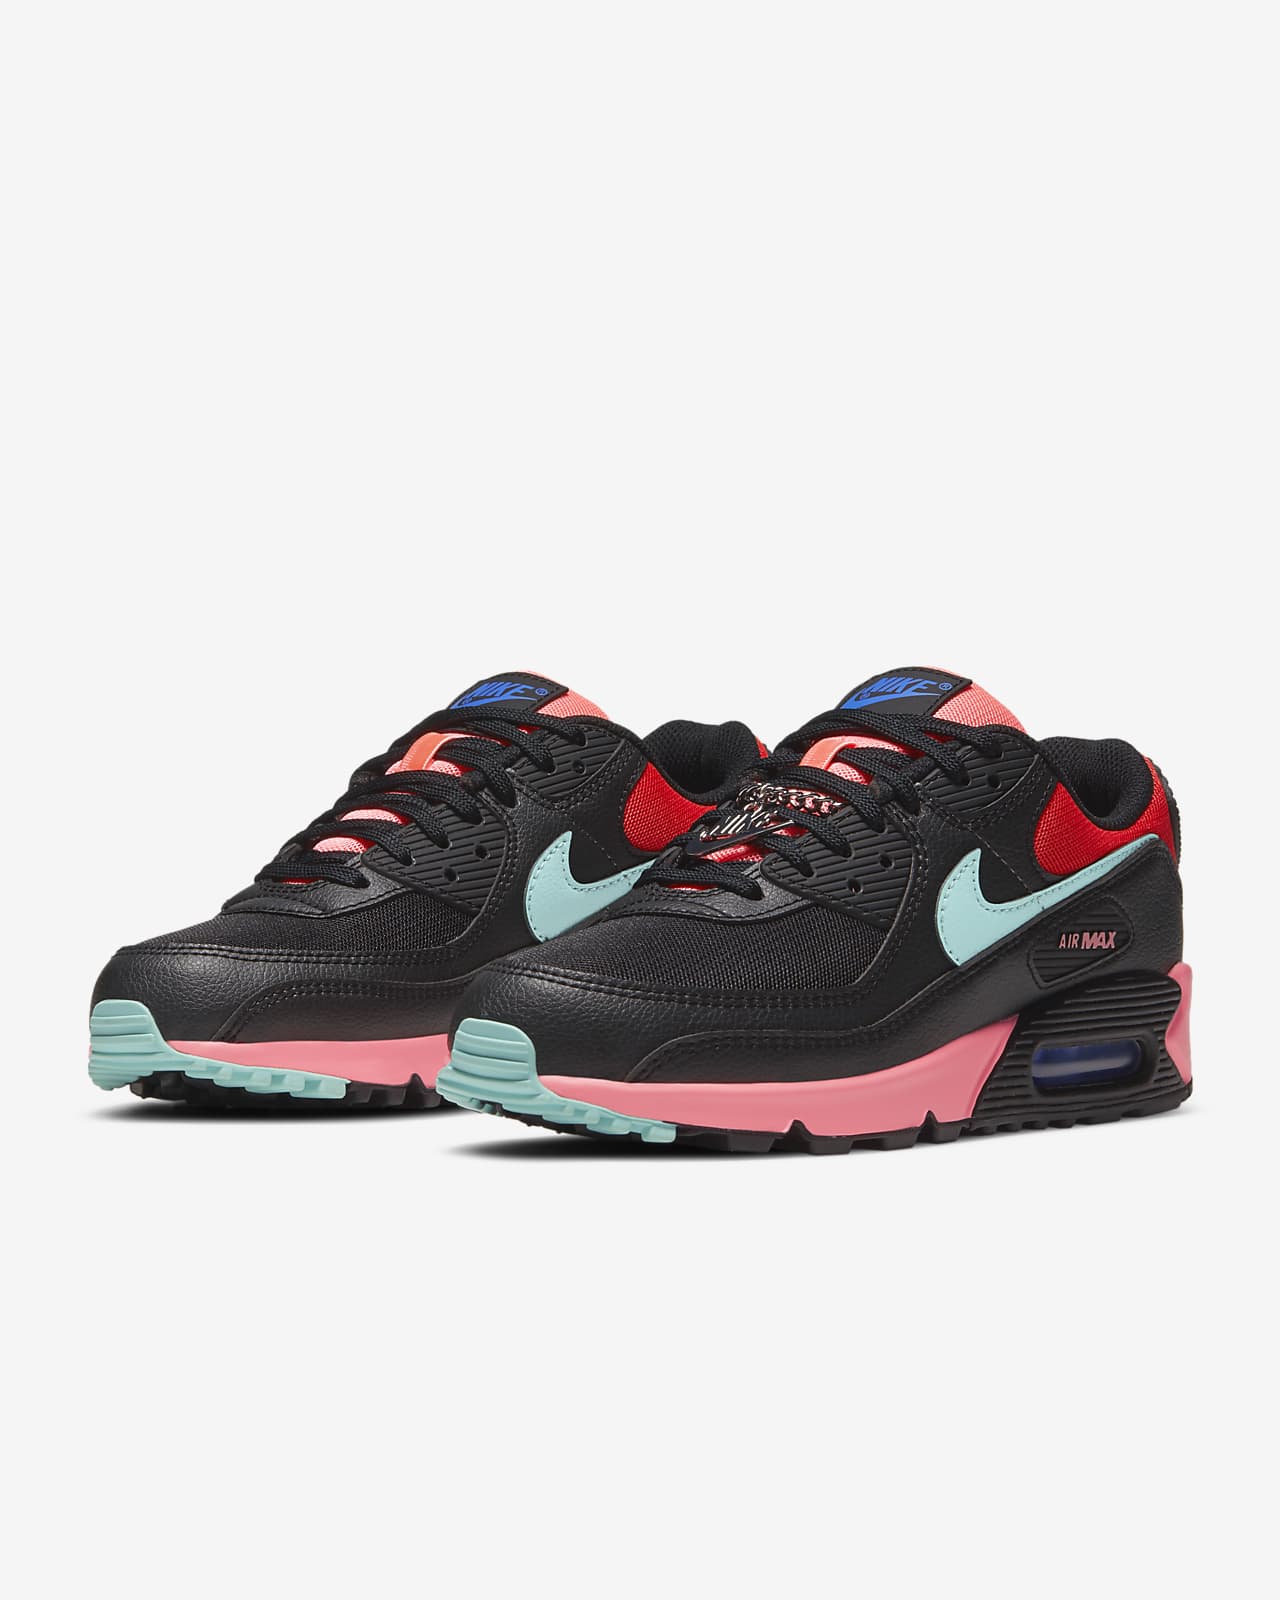 womens red and black nike air max